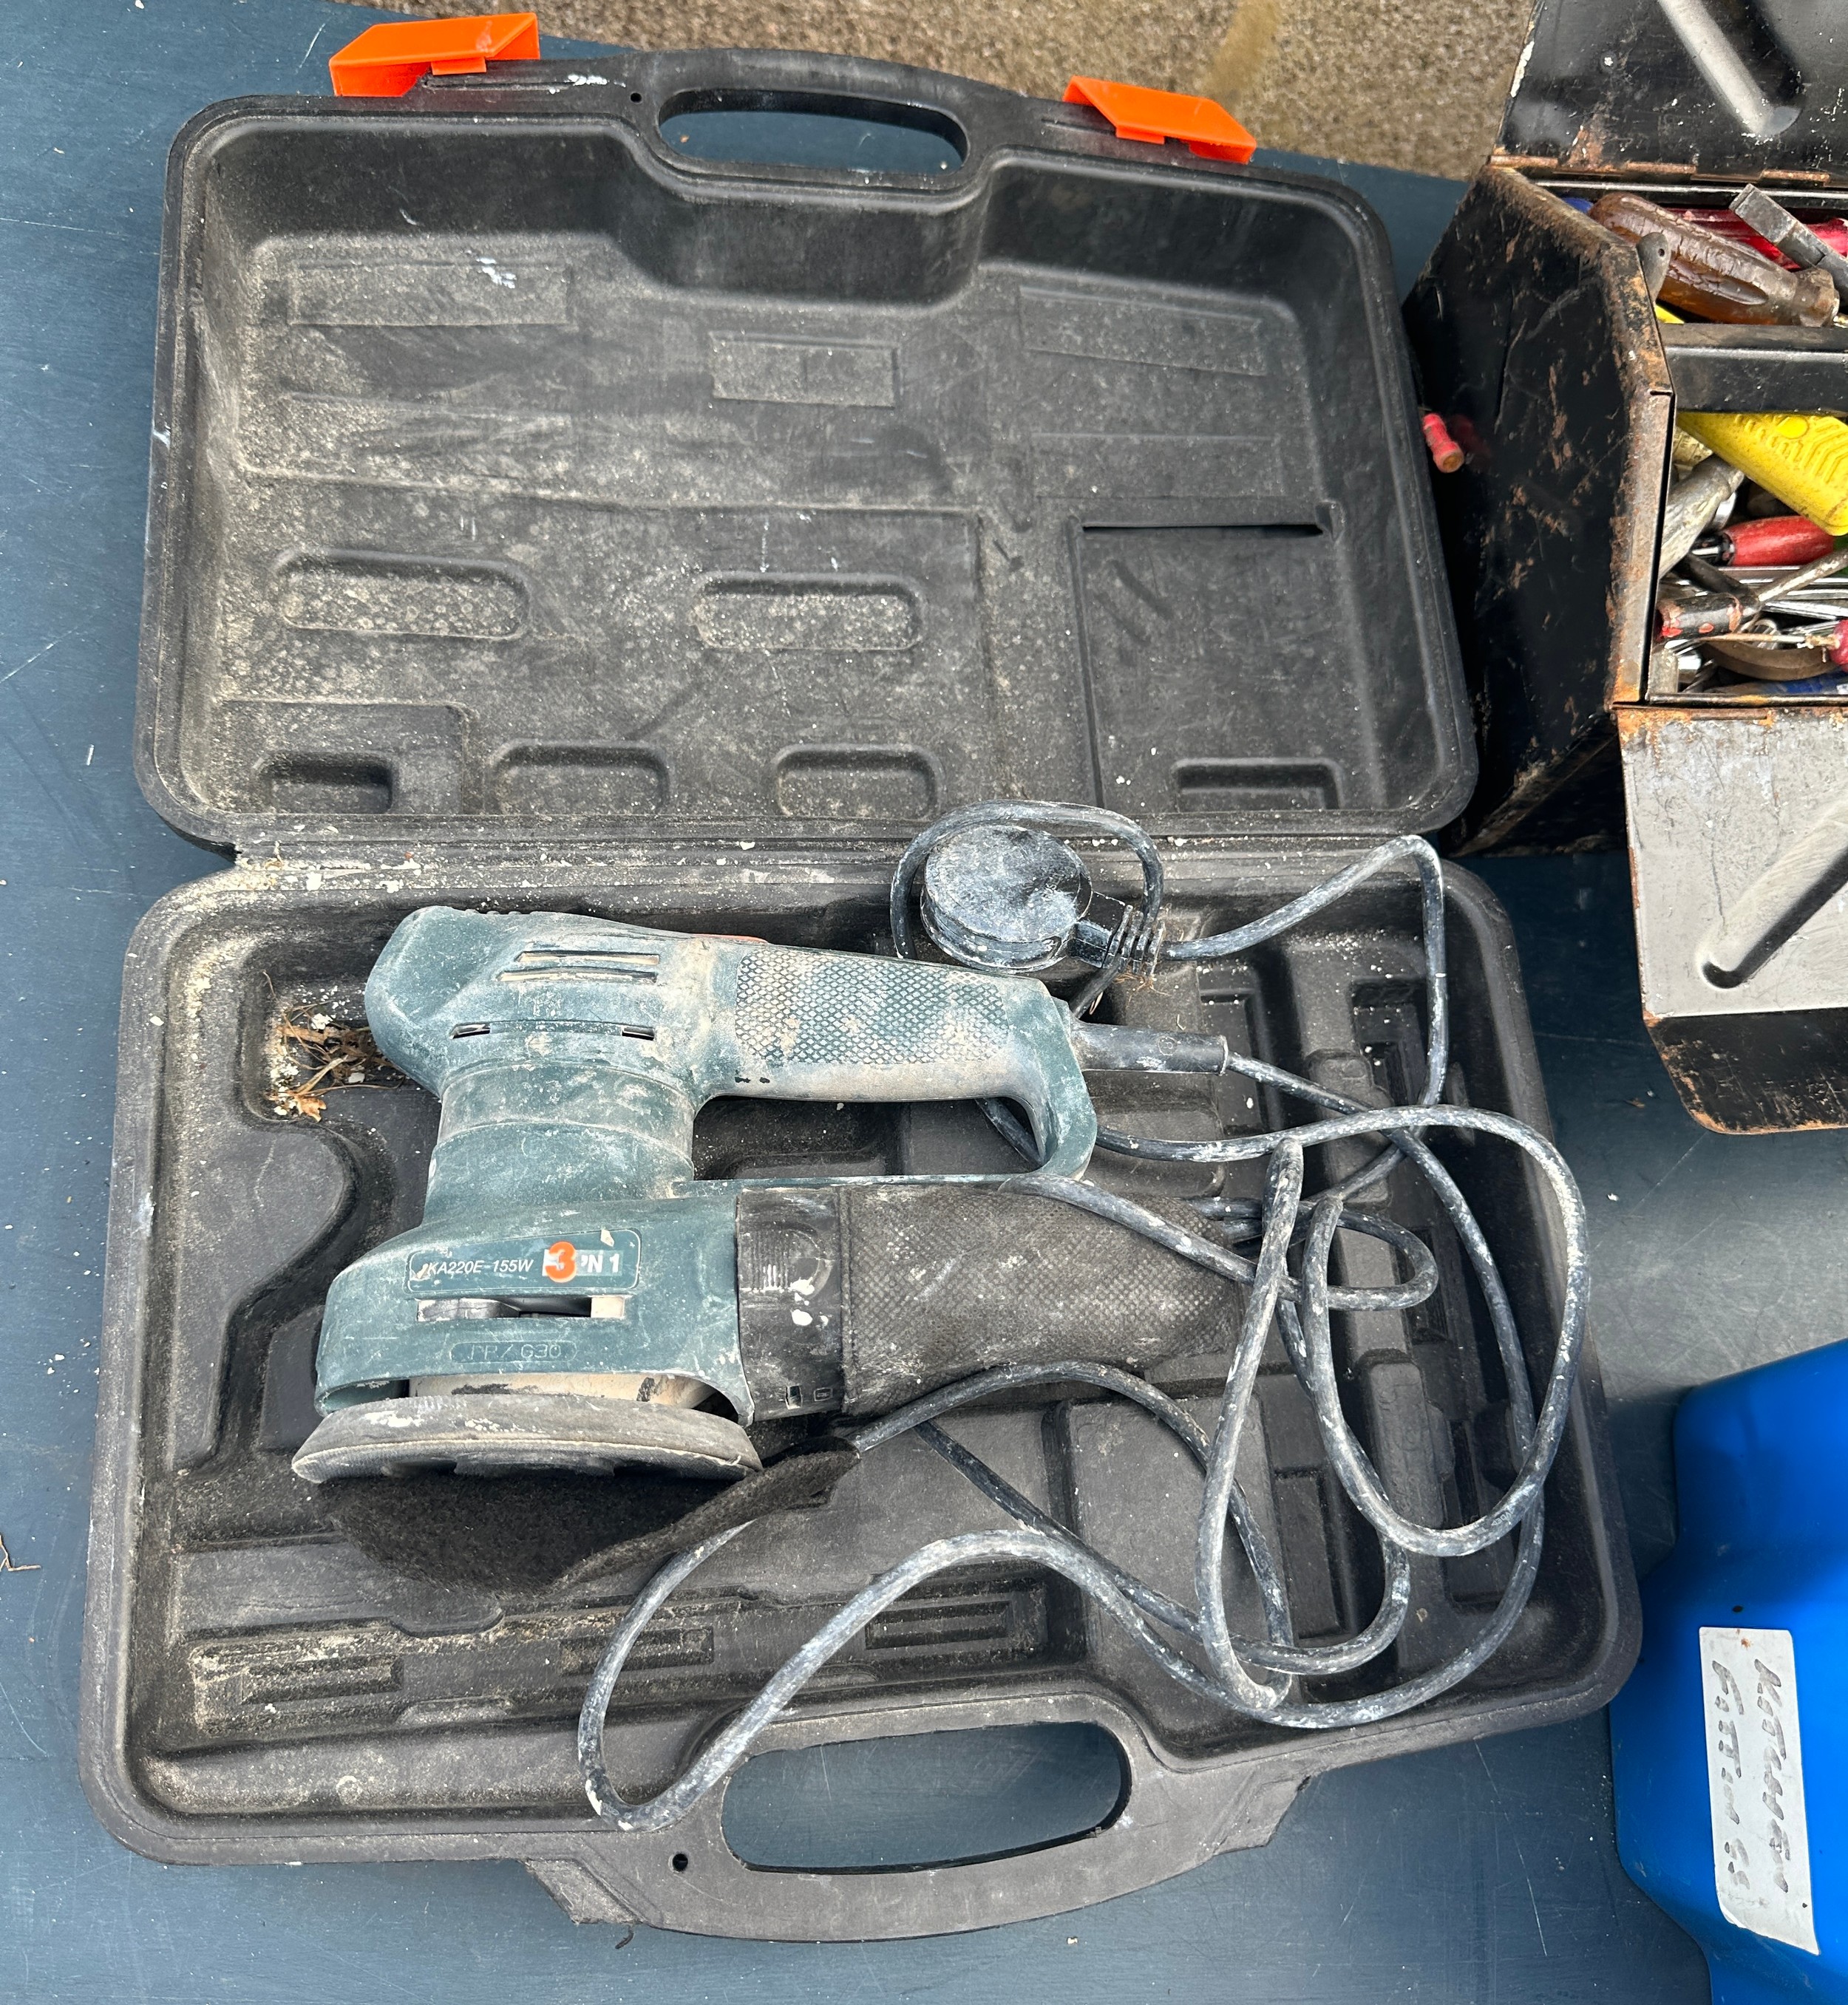 Cased challenge Xtreme sander, with a metal tool box and contents - Image 2 of 4